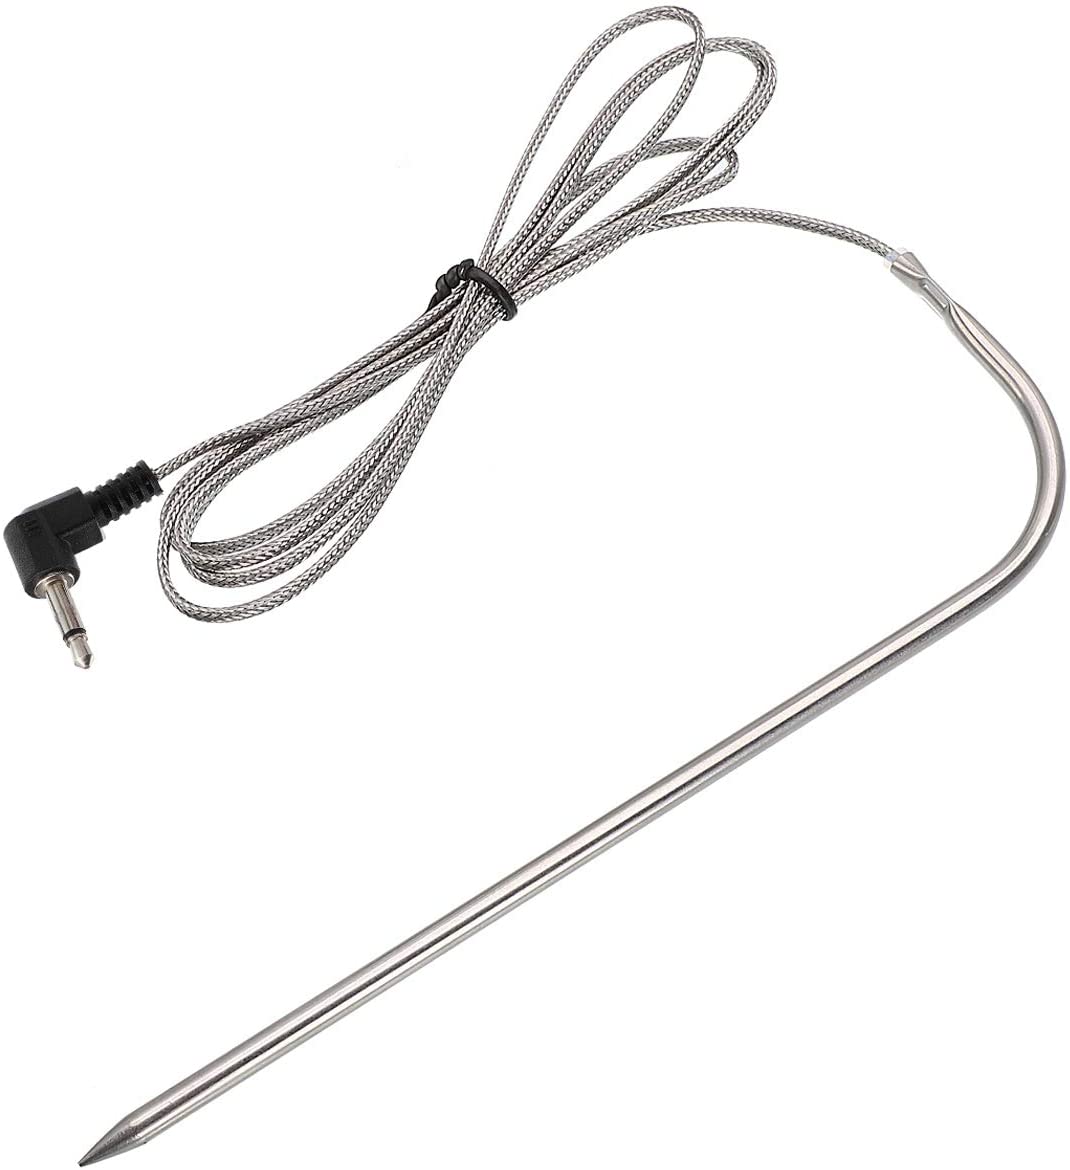 Waterproof Meat Probe - Compatible With Traeger & Pit Boss Bbq